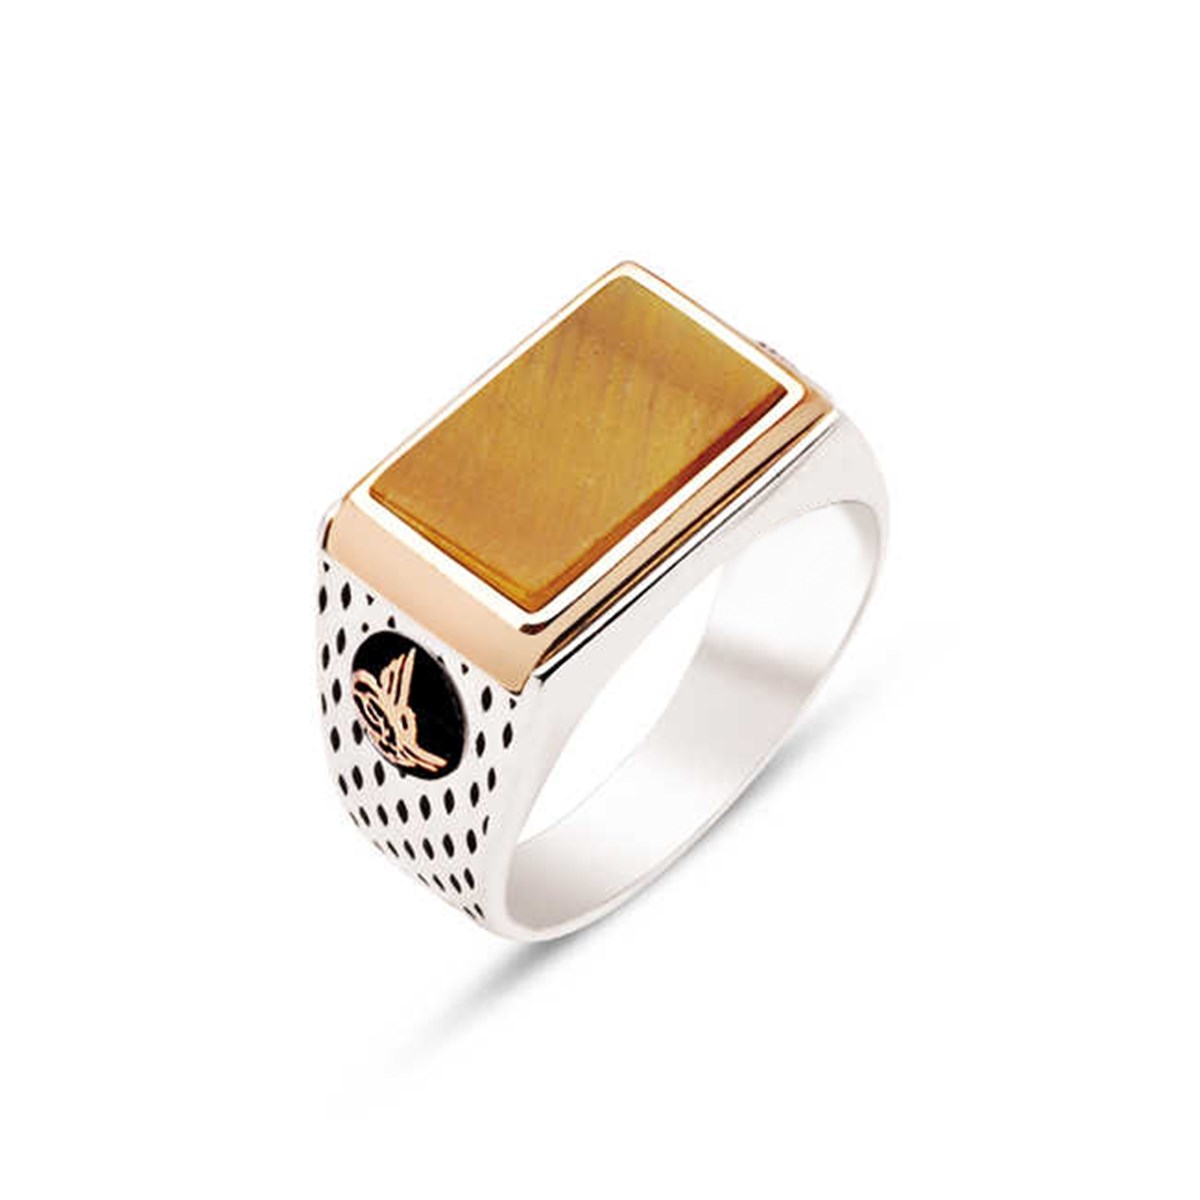 Silver Tiger Eye Stone Tugra Dotted Case Men's Ring